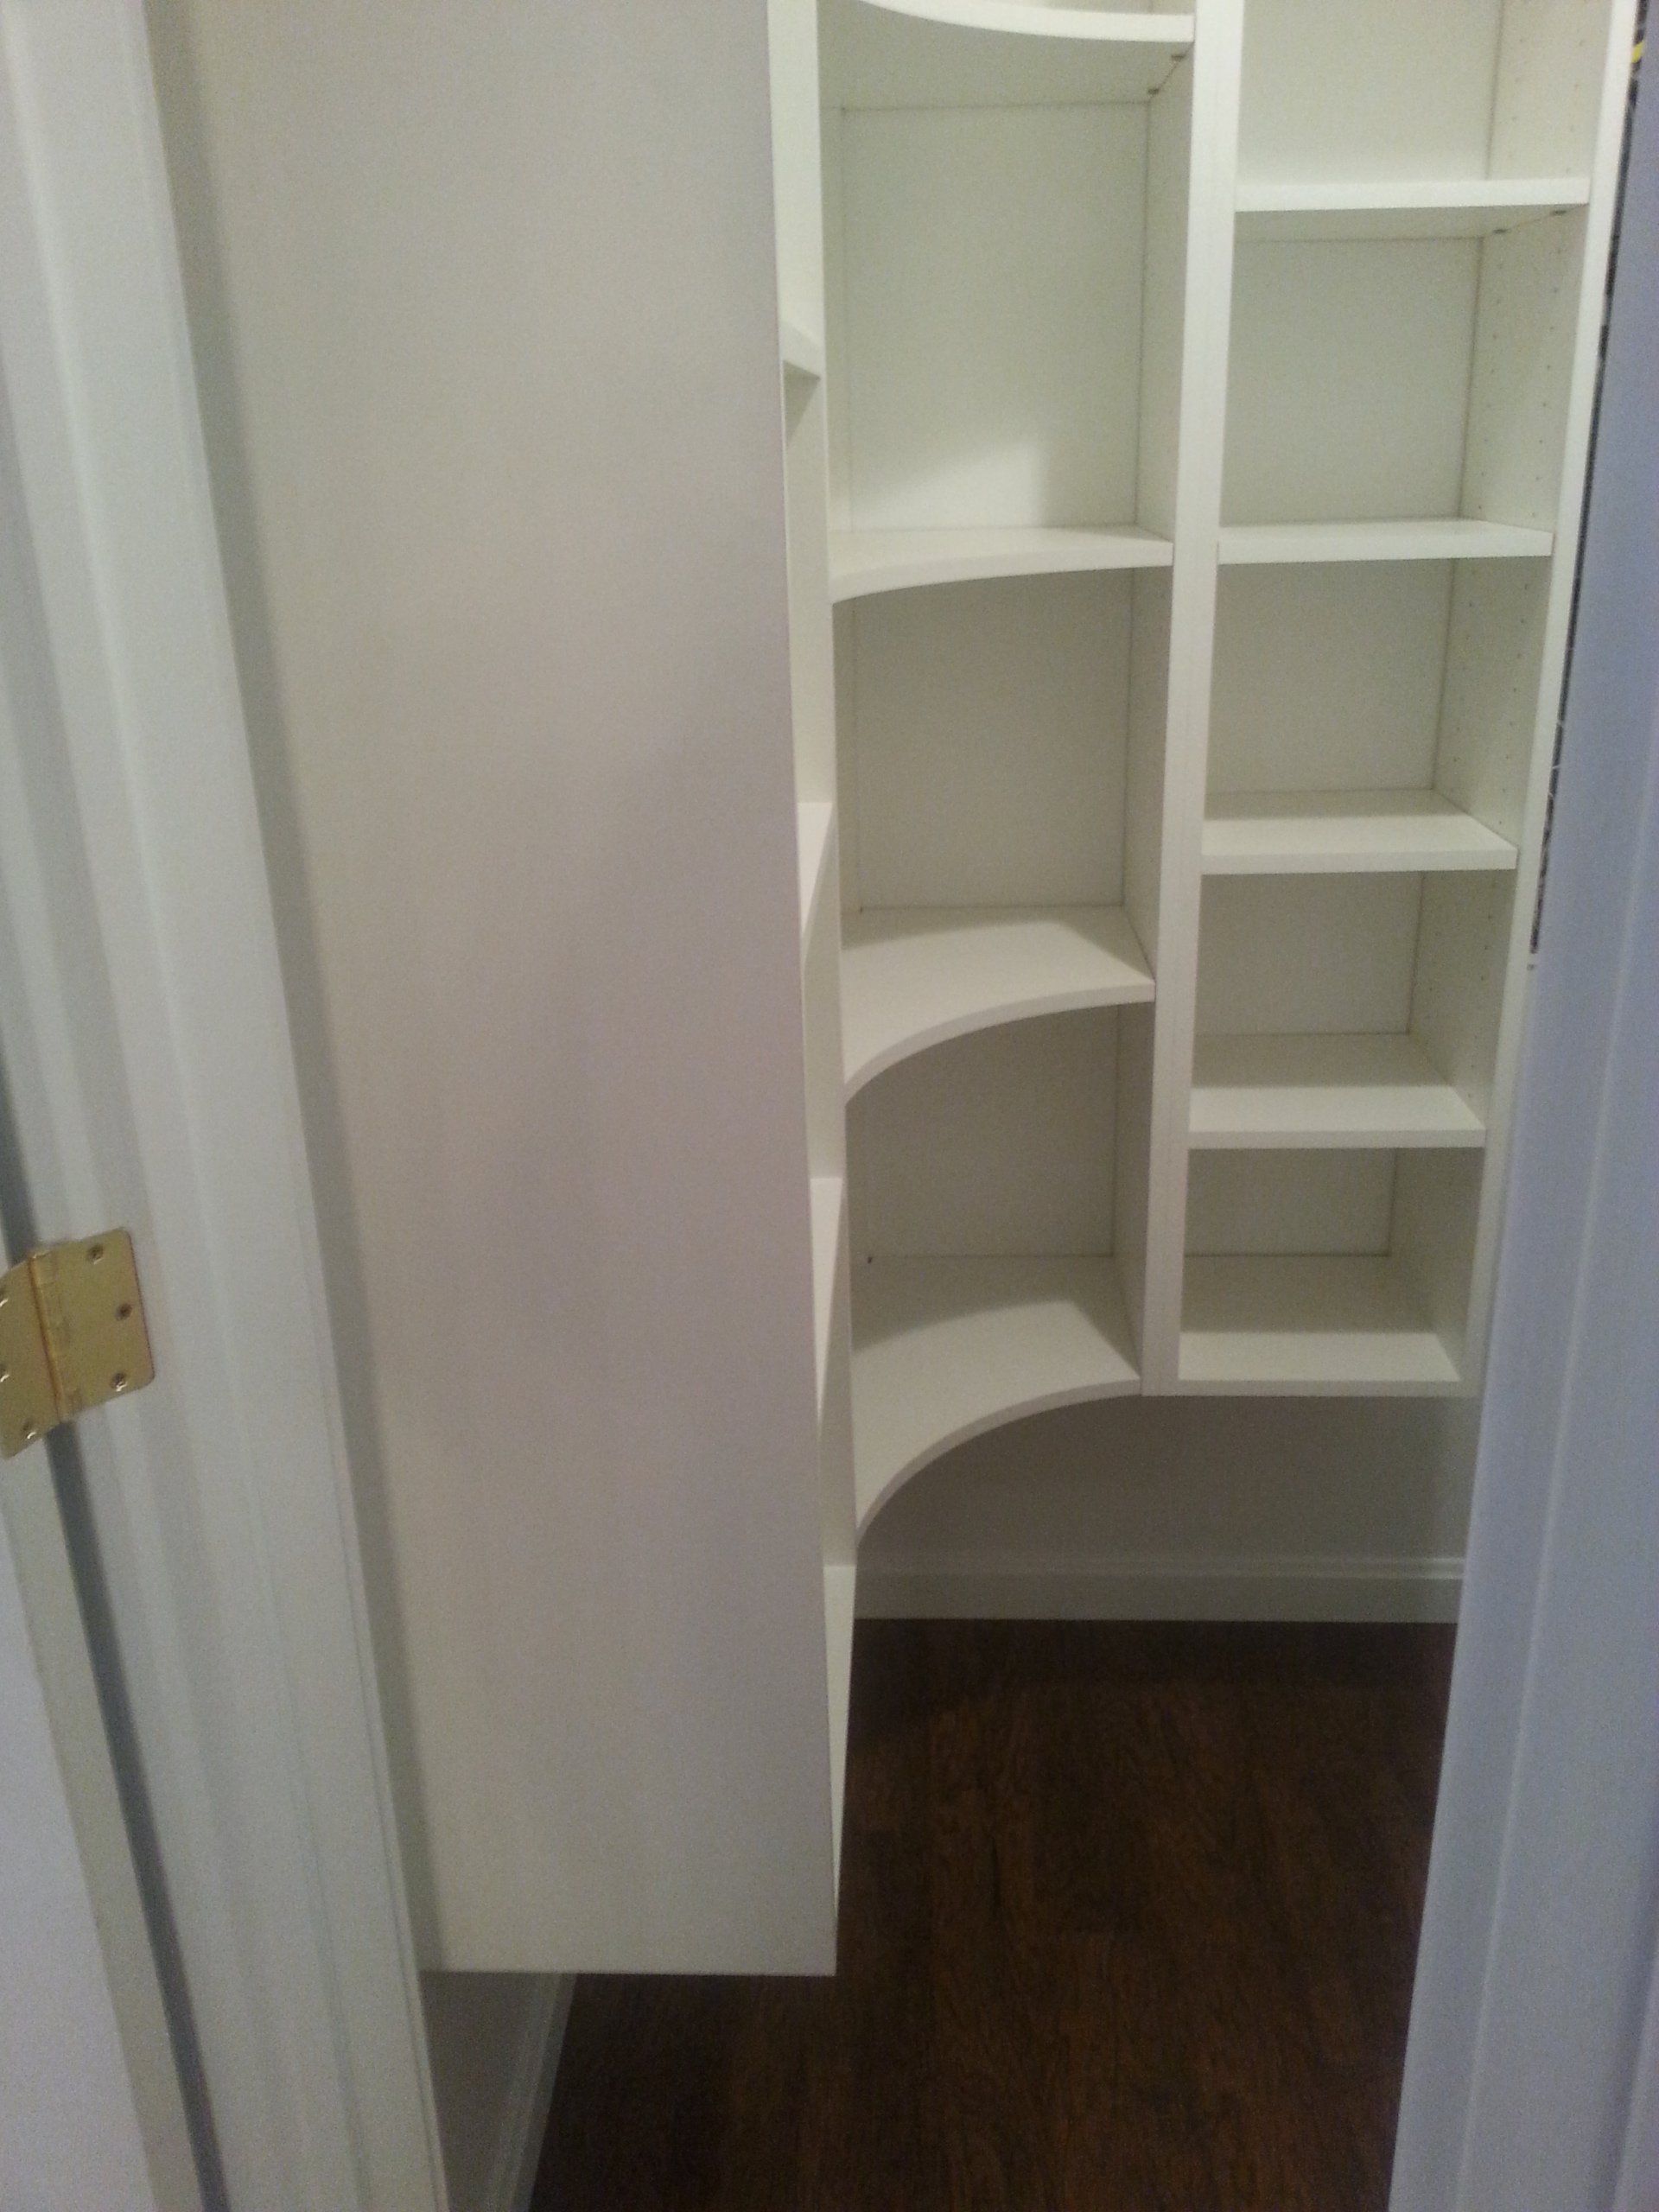 box Shelves — Closet Design & Remodeling in Erie, PA